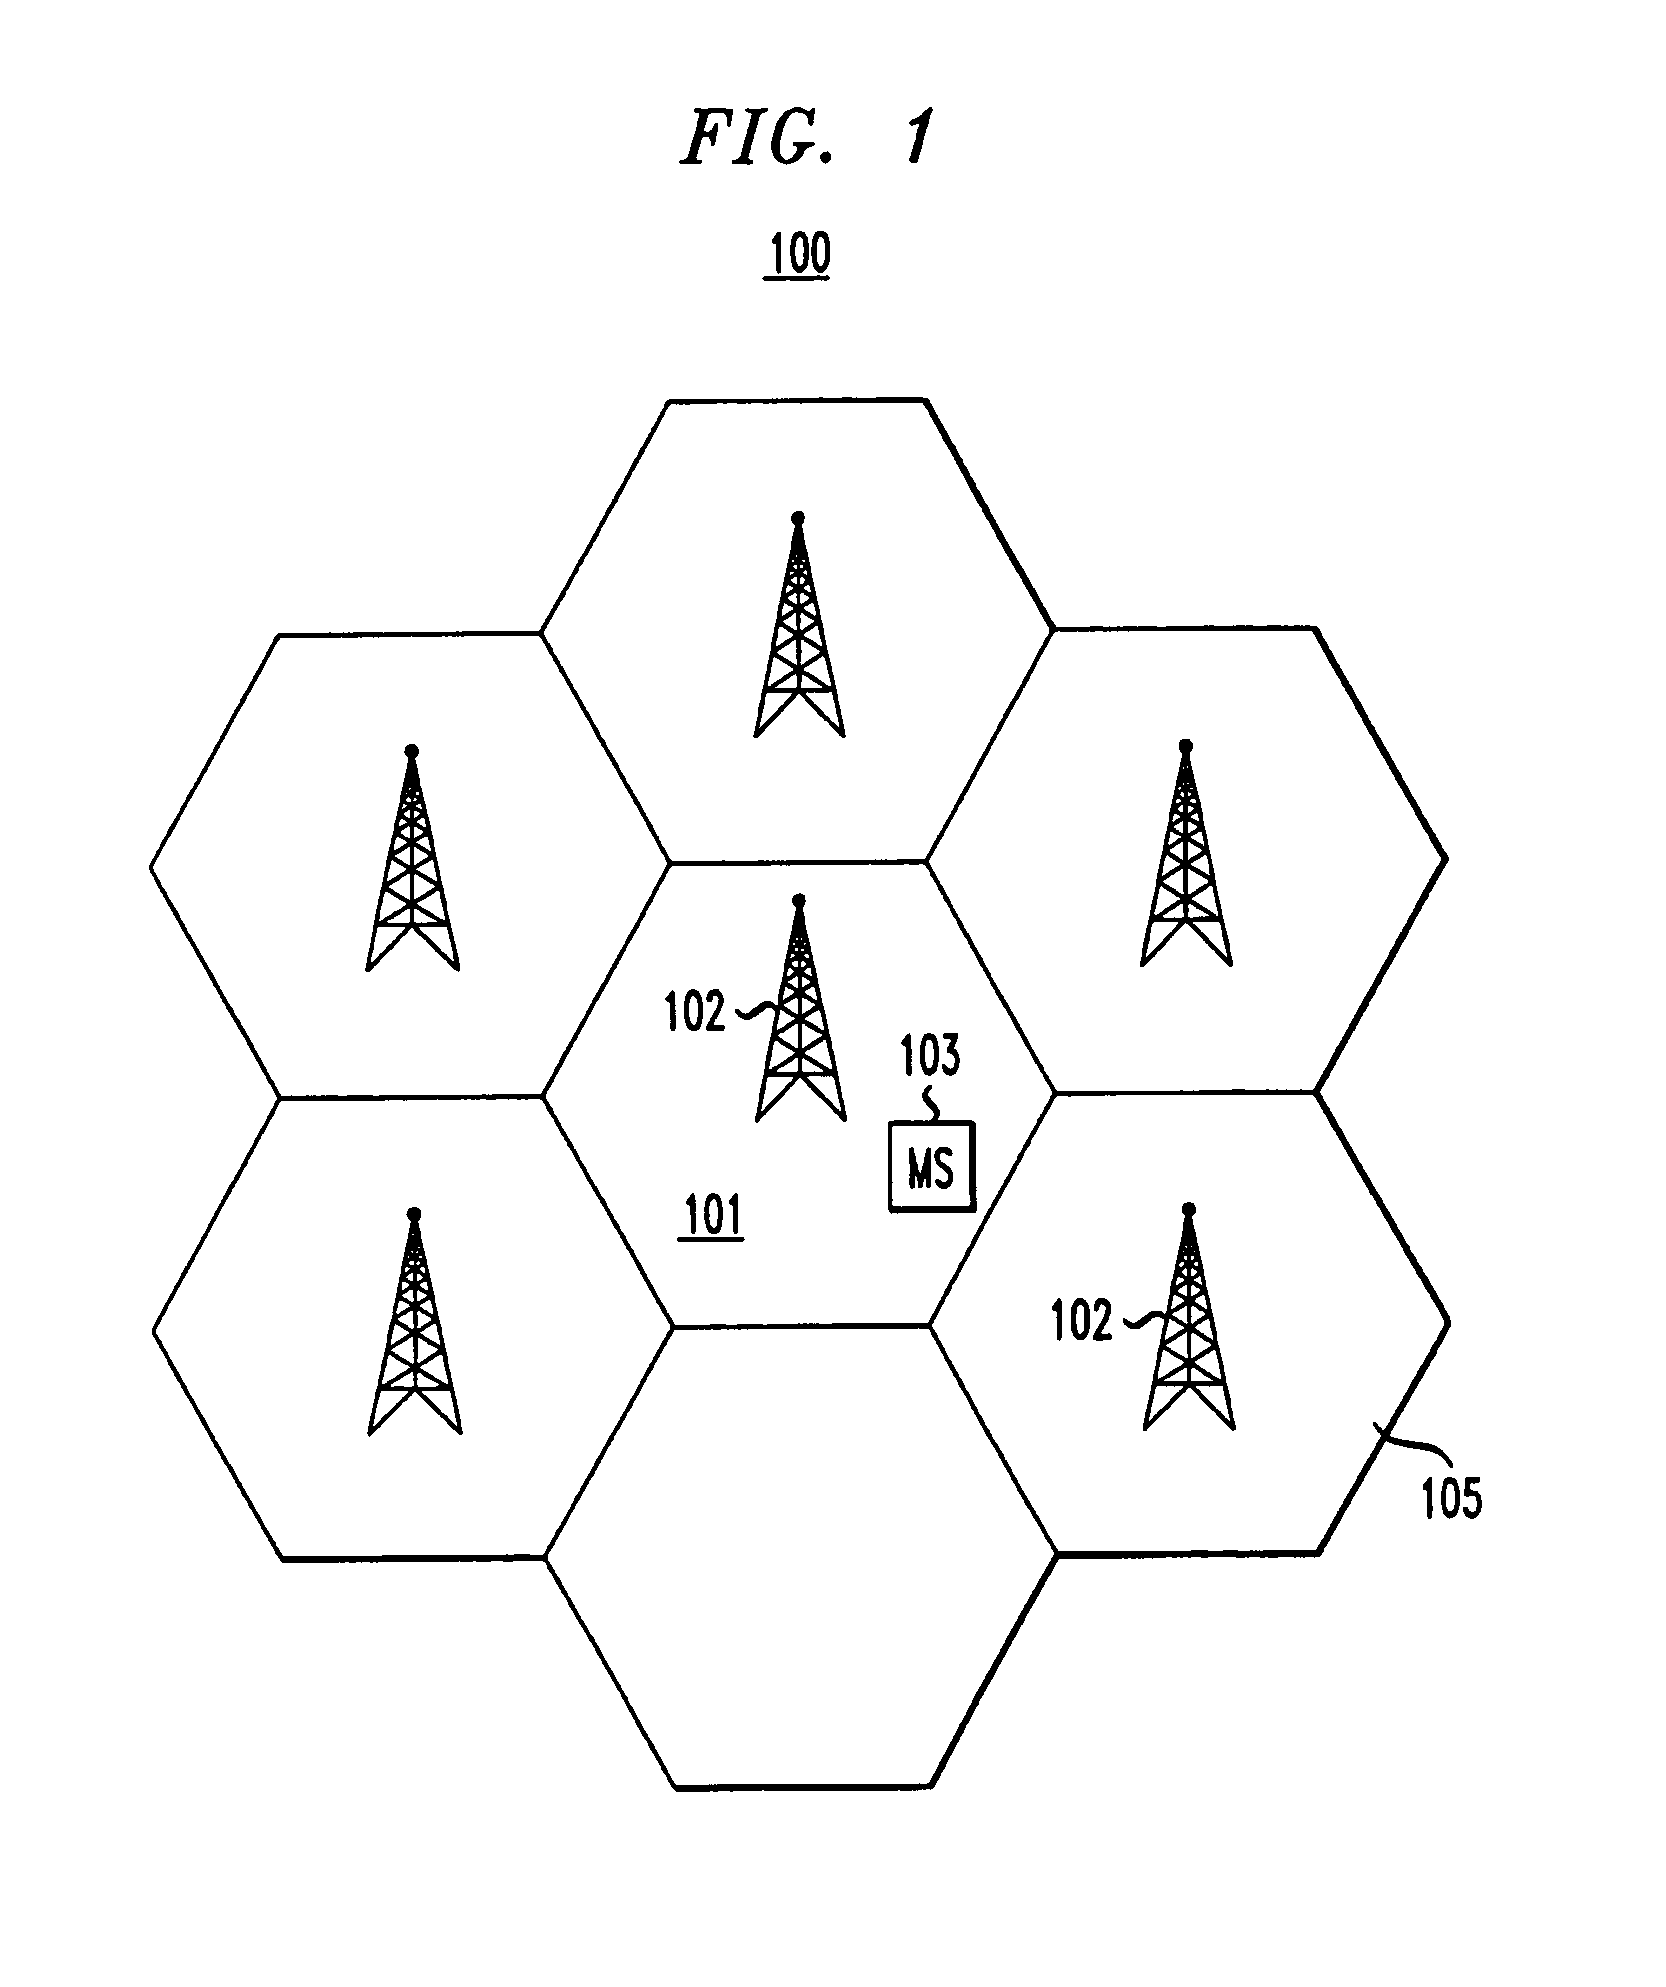 Rate-adaptive methods for communicating over multiple input/multiple output wireless systems